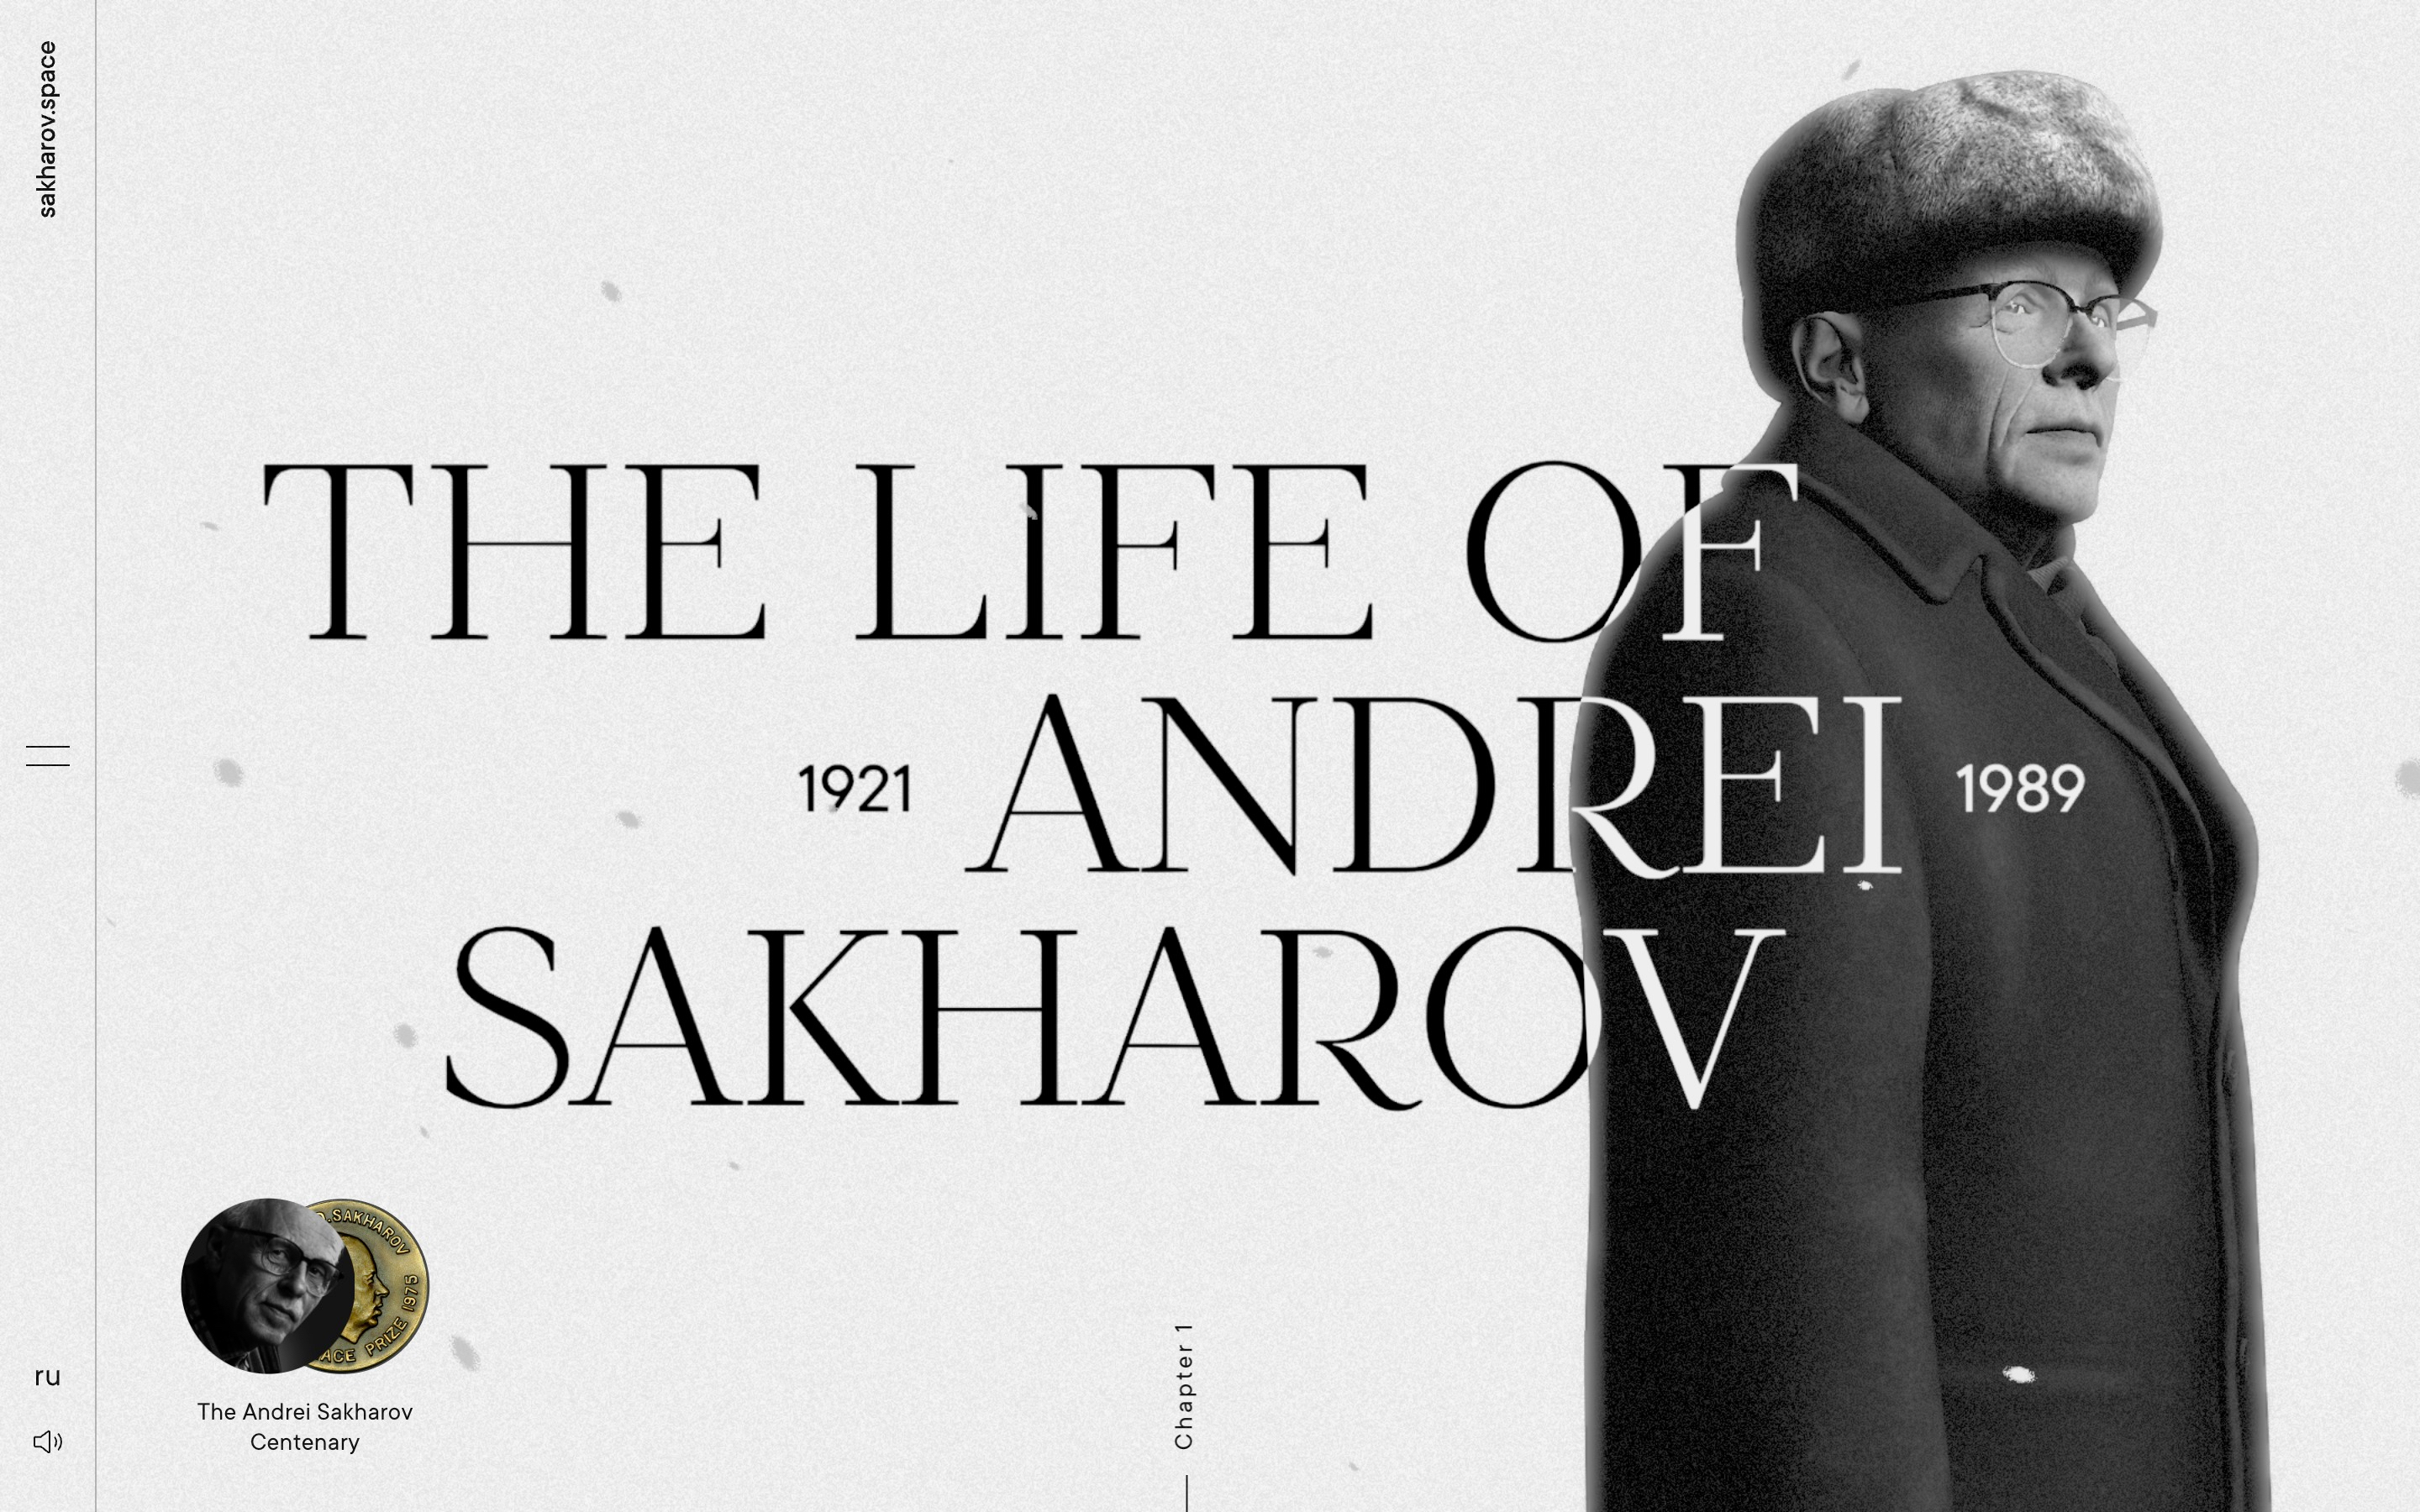 A screenshot showing one of the first frames of the Andrei Dmitrievich Sakharov website.